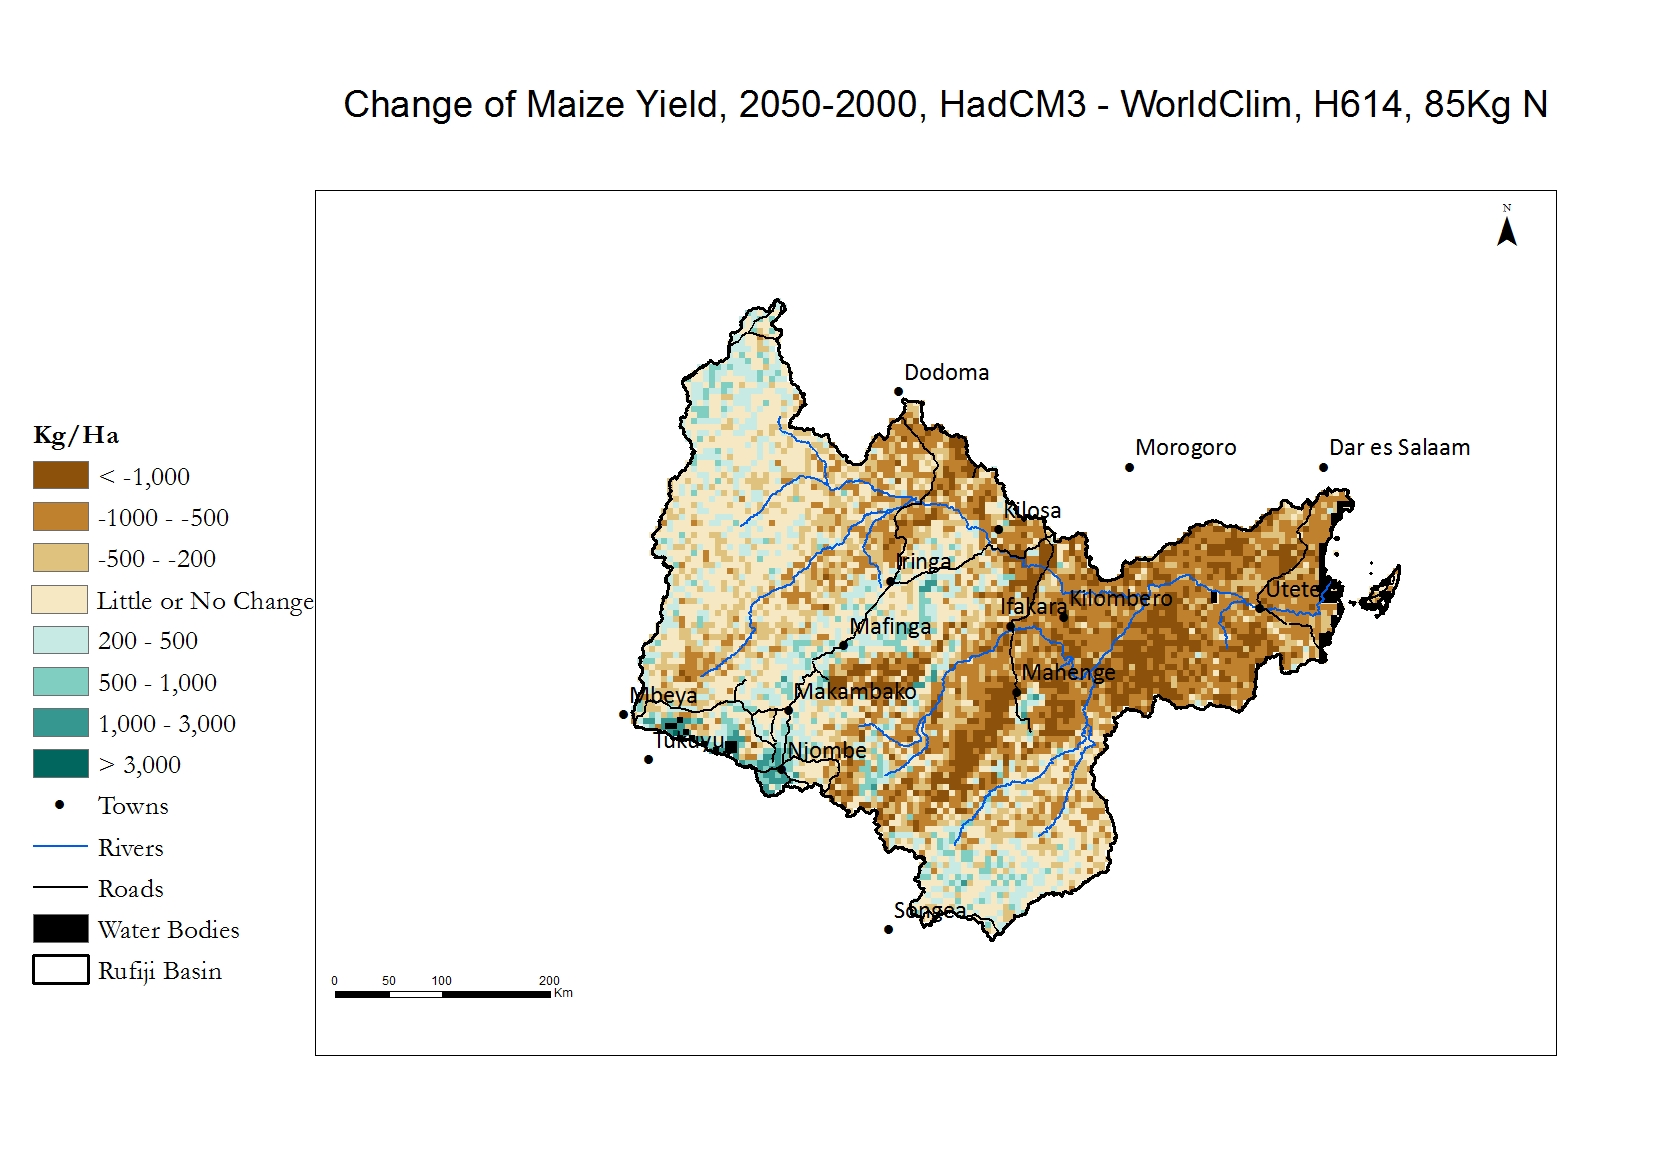 Change between current rainfed yield and future rainfed yield